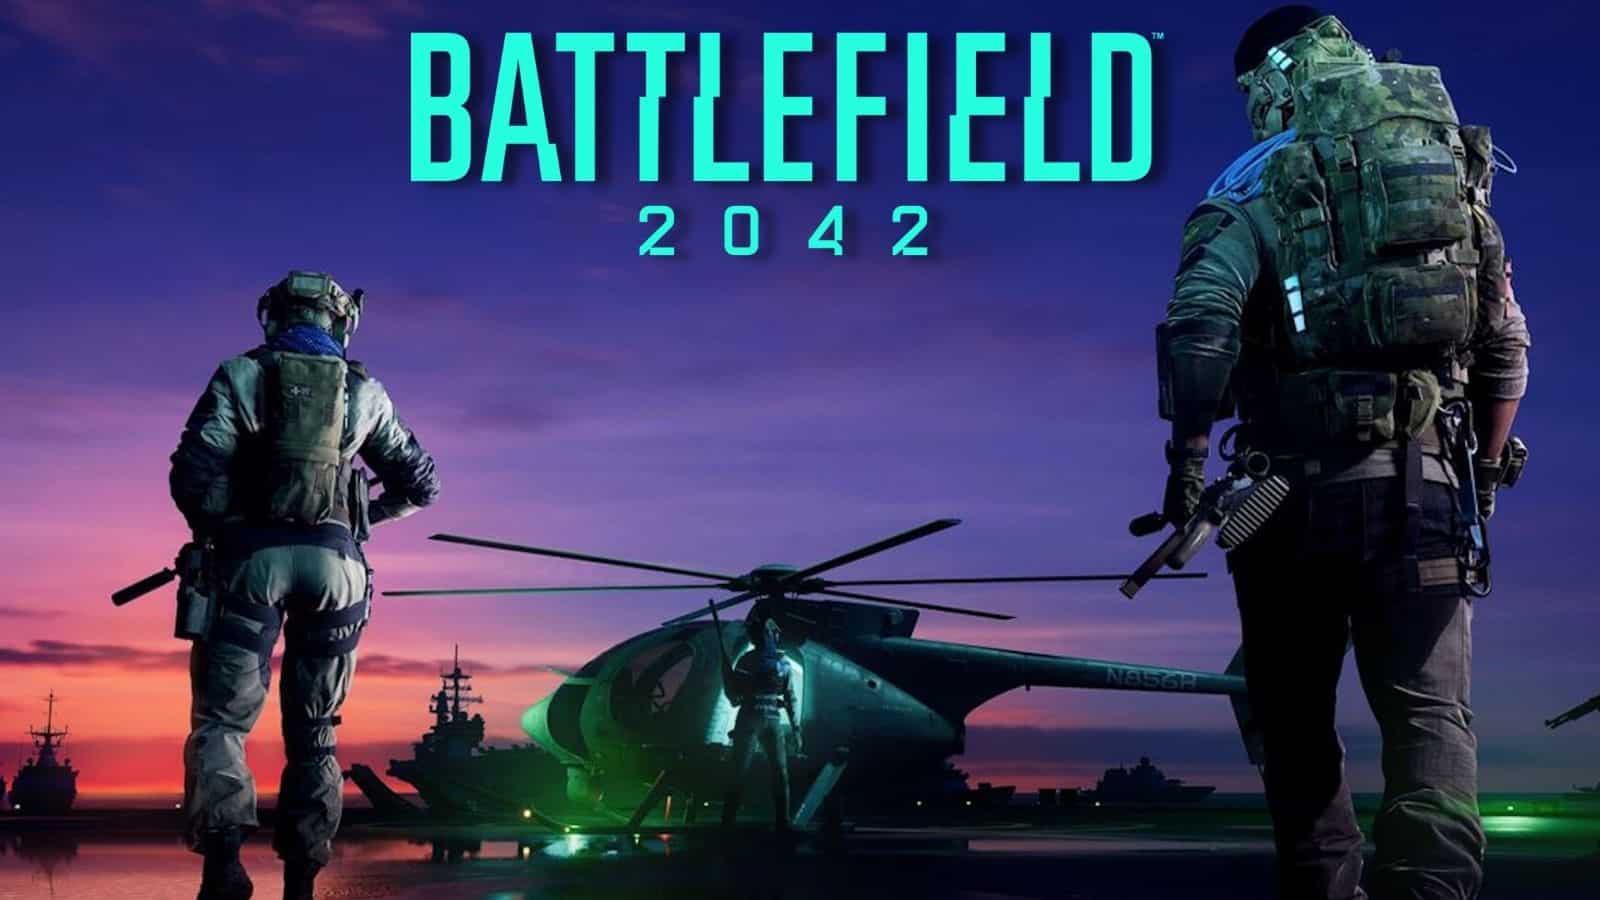 Battlefield 2042' battle royale mode had to get creative with limited tools